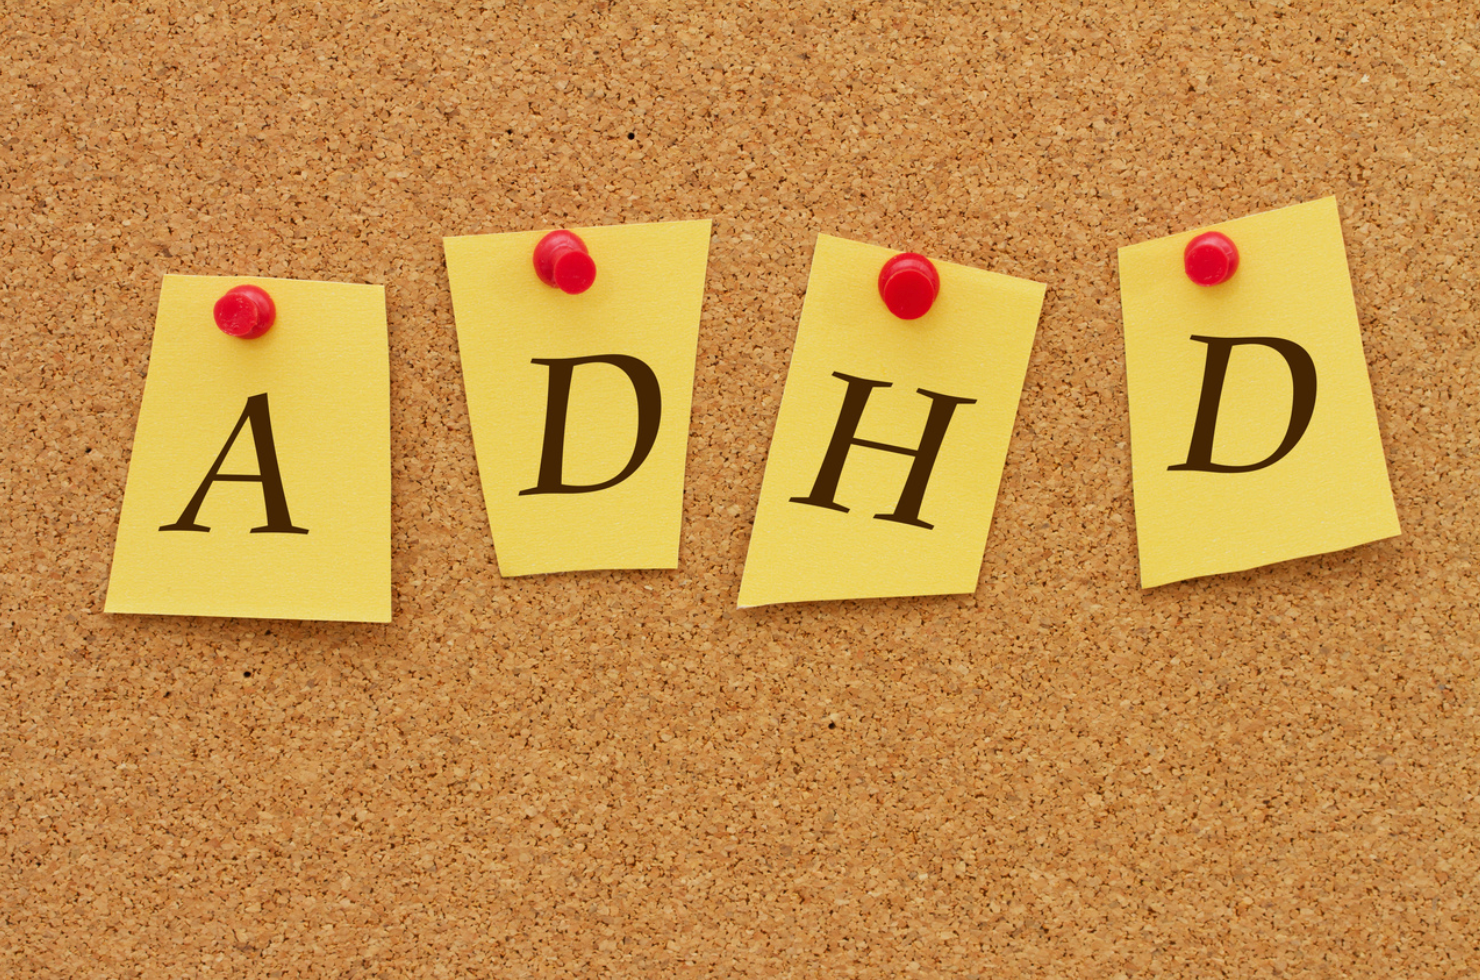 Amino Acid Profile Differentiation Detected Among Children With ADHD